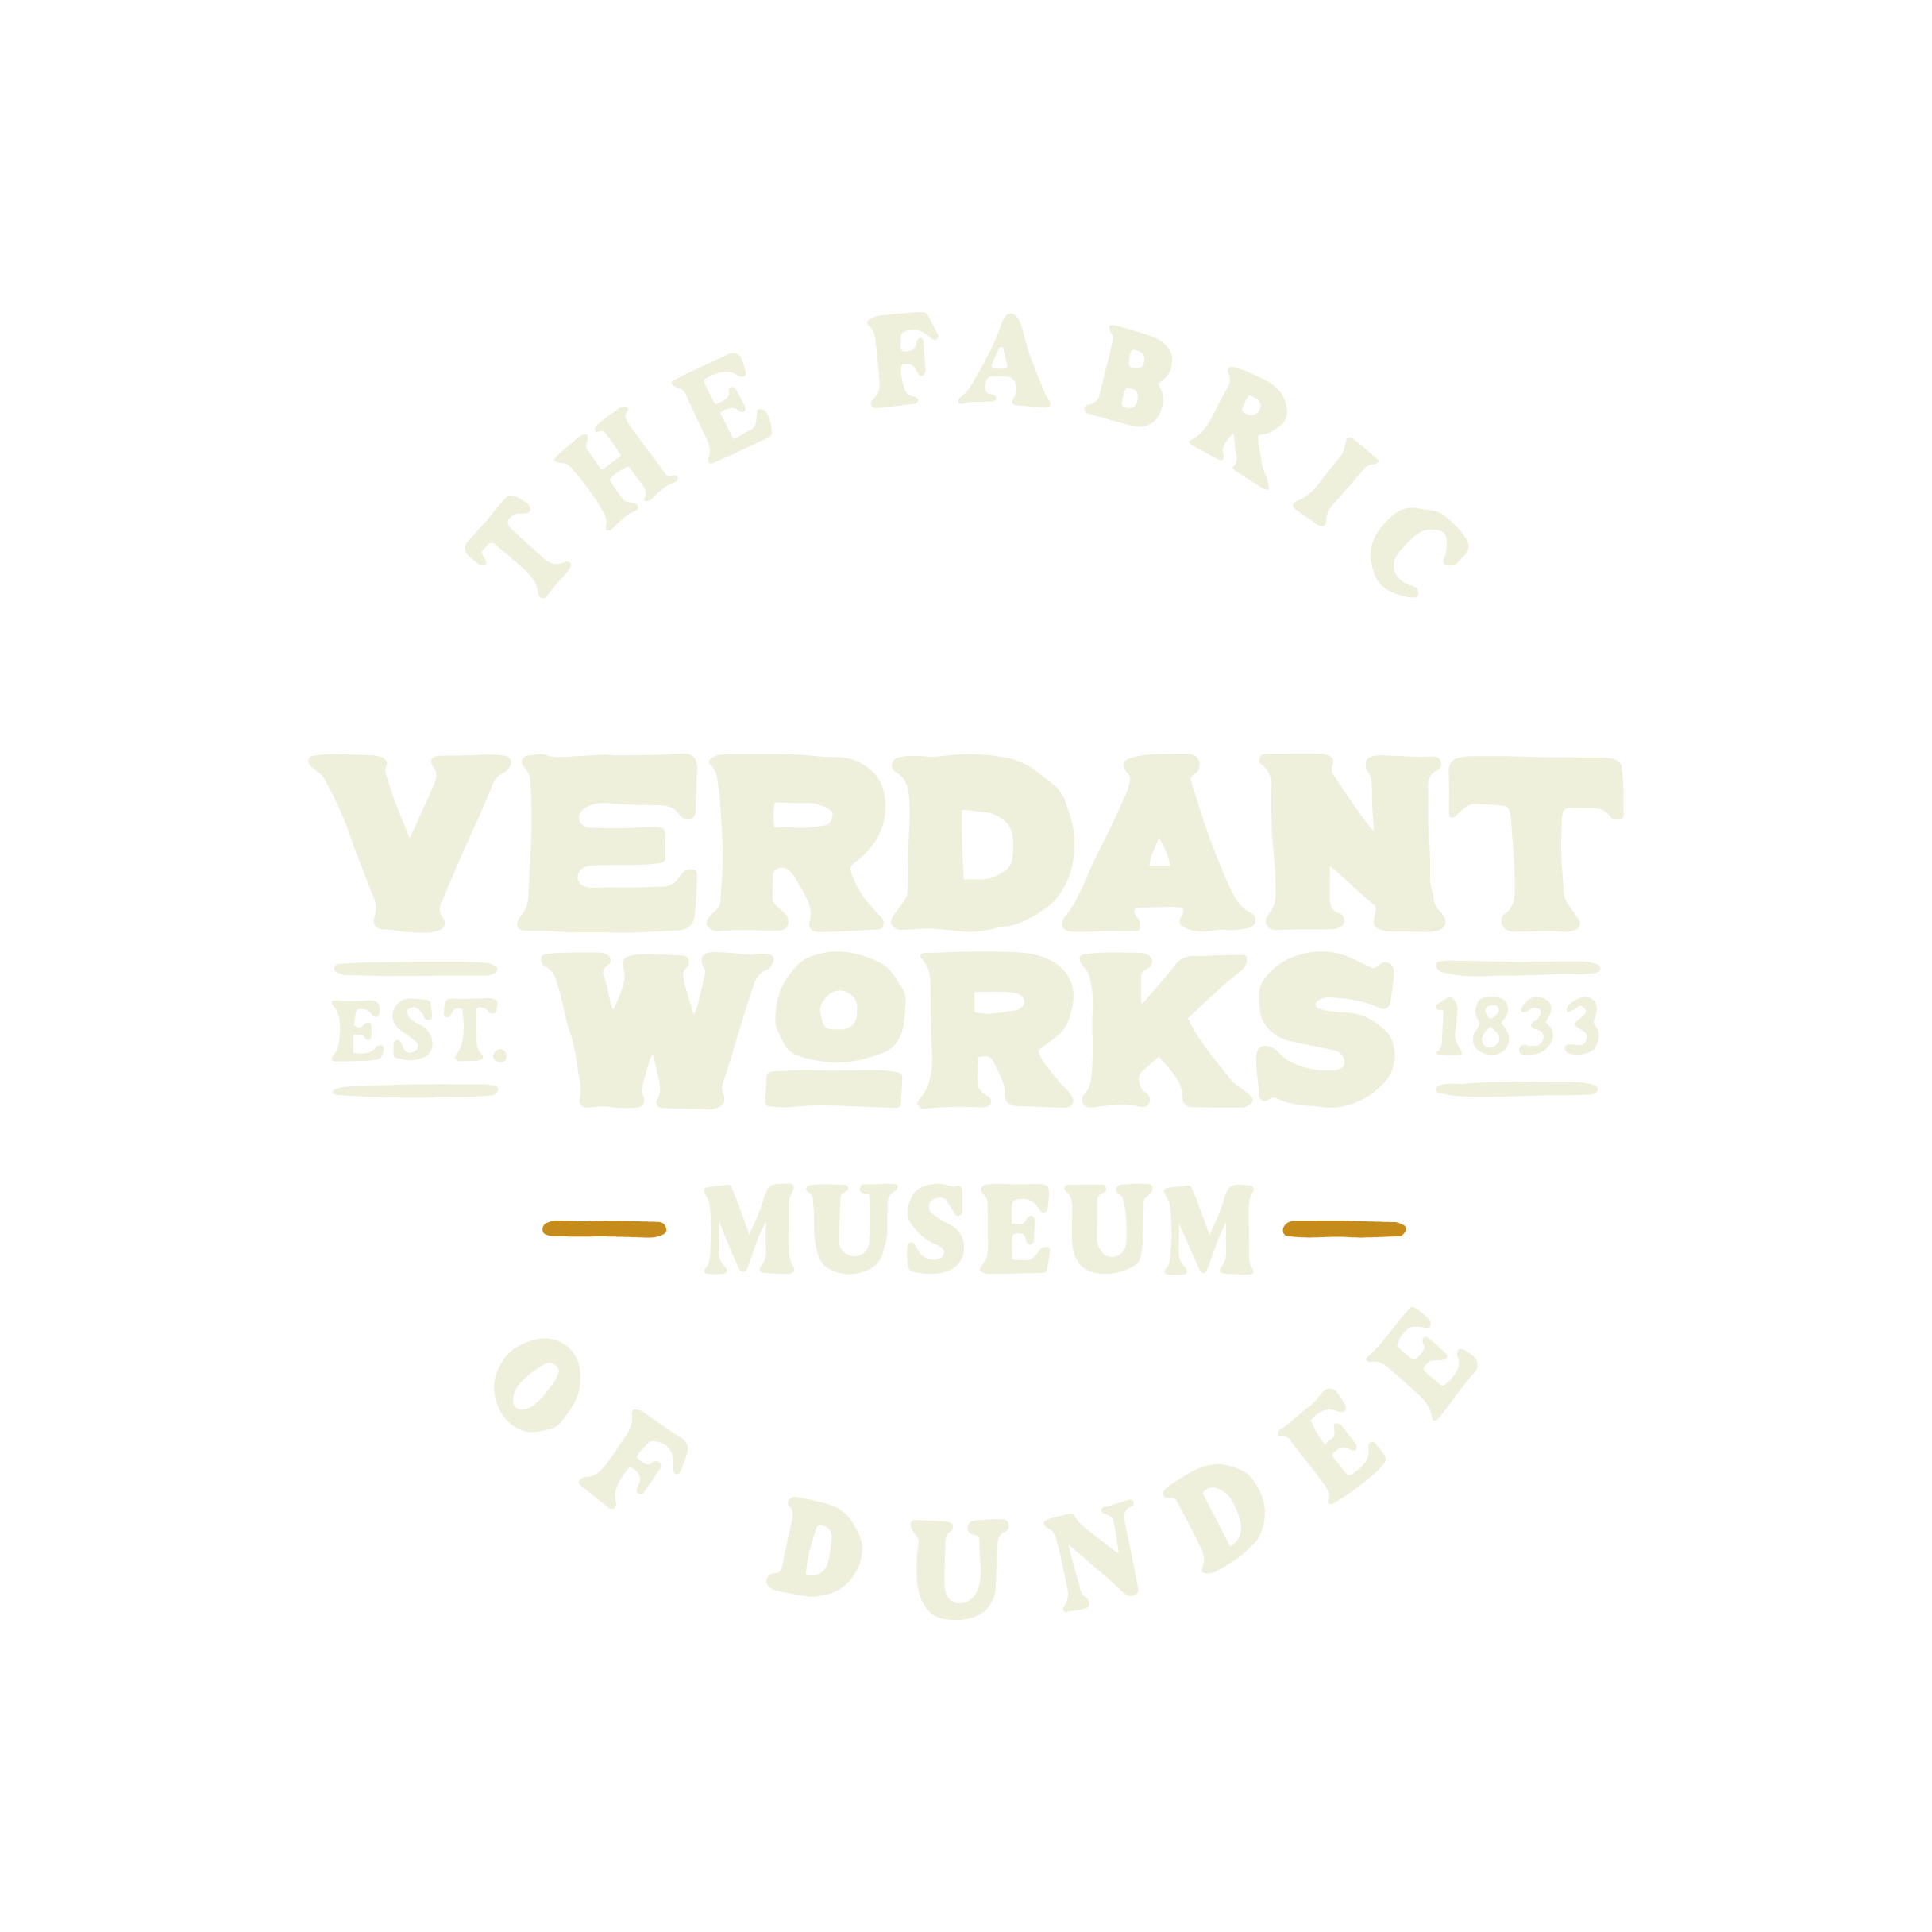 The Fabric of Dundee